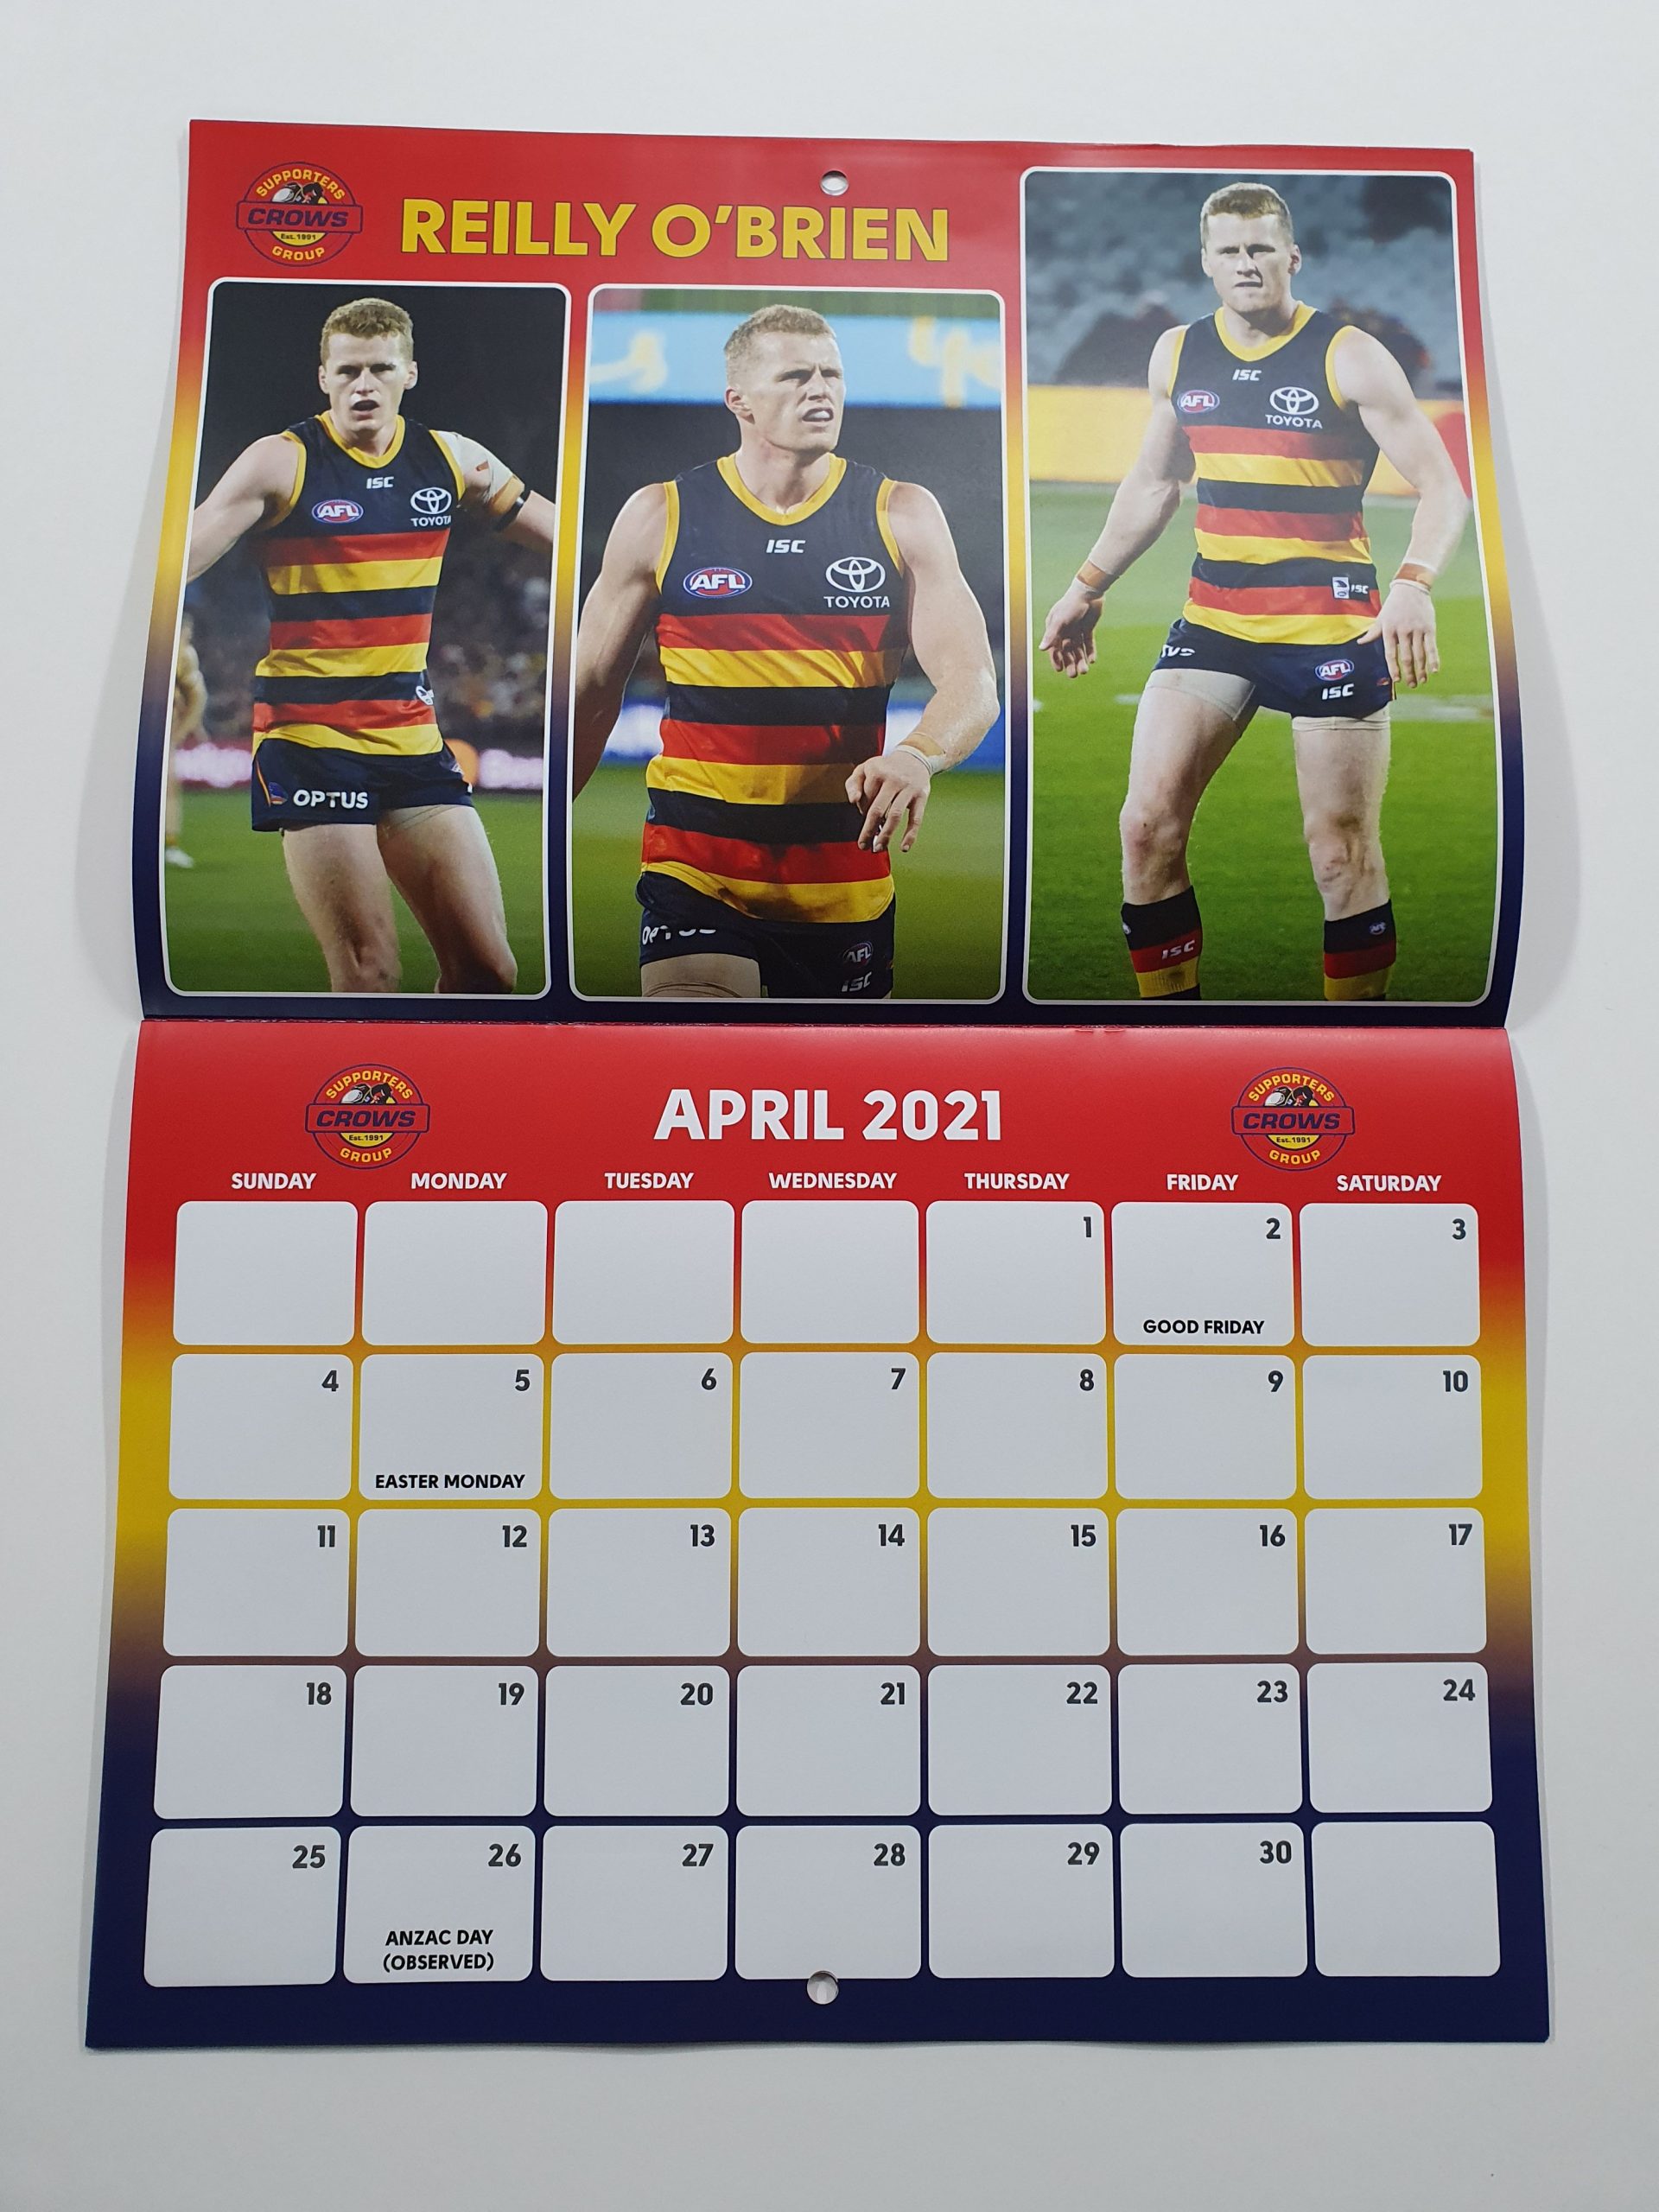 Crows Supporter Group 2021 Calendar – Adelaide Crows Supporters Group